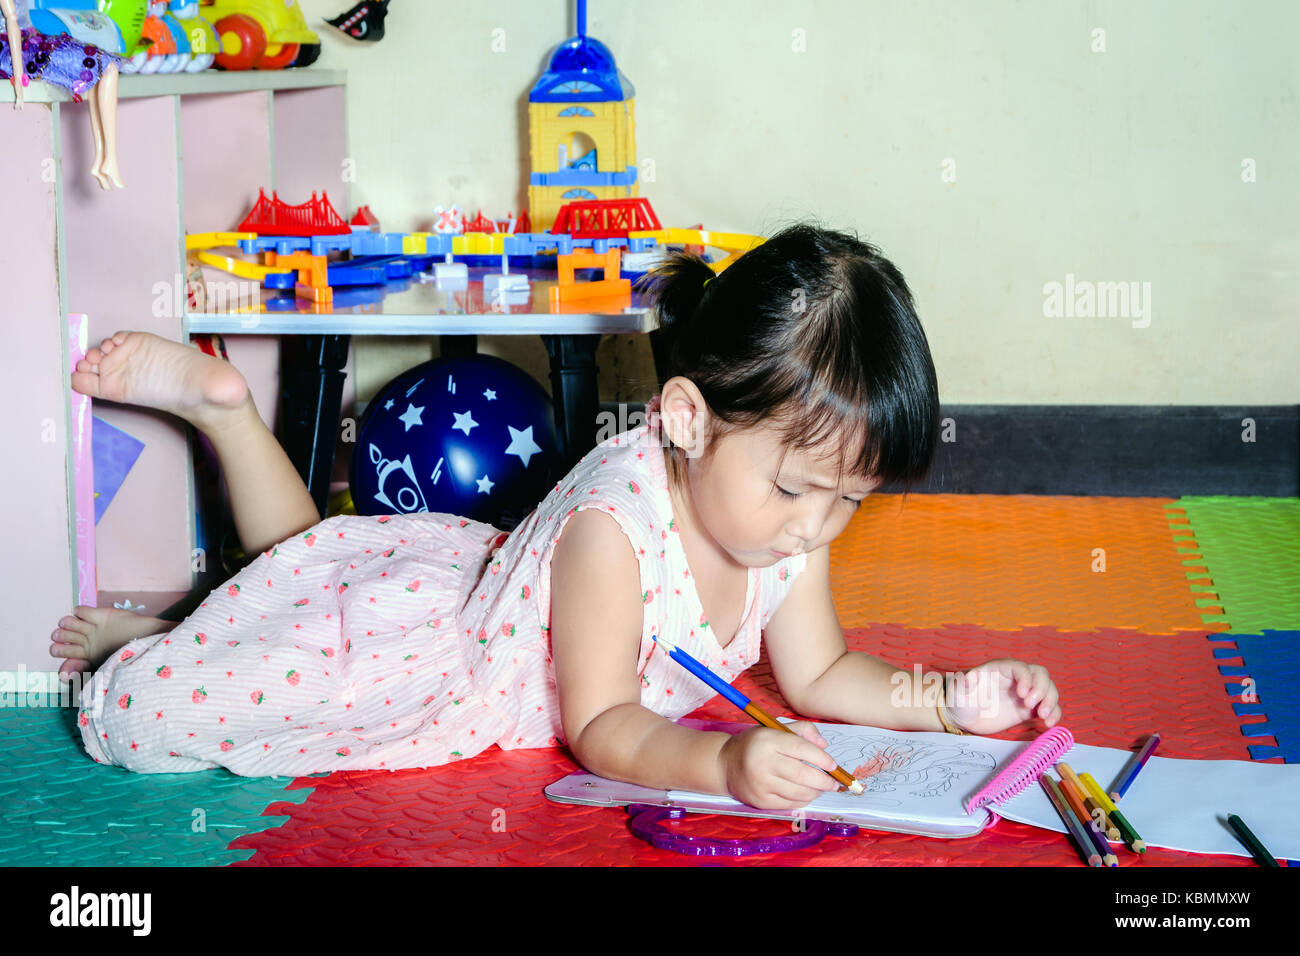 Little child painting with colorful pencils indoors at home Stock Photo